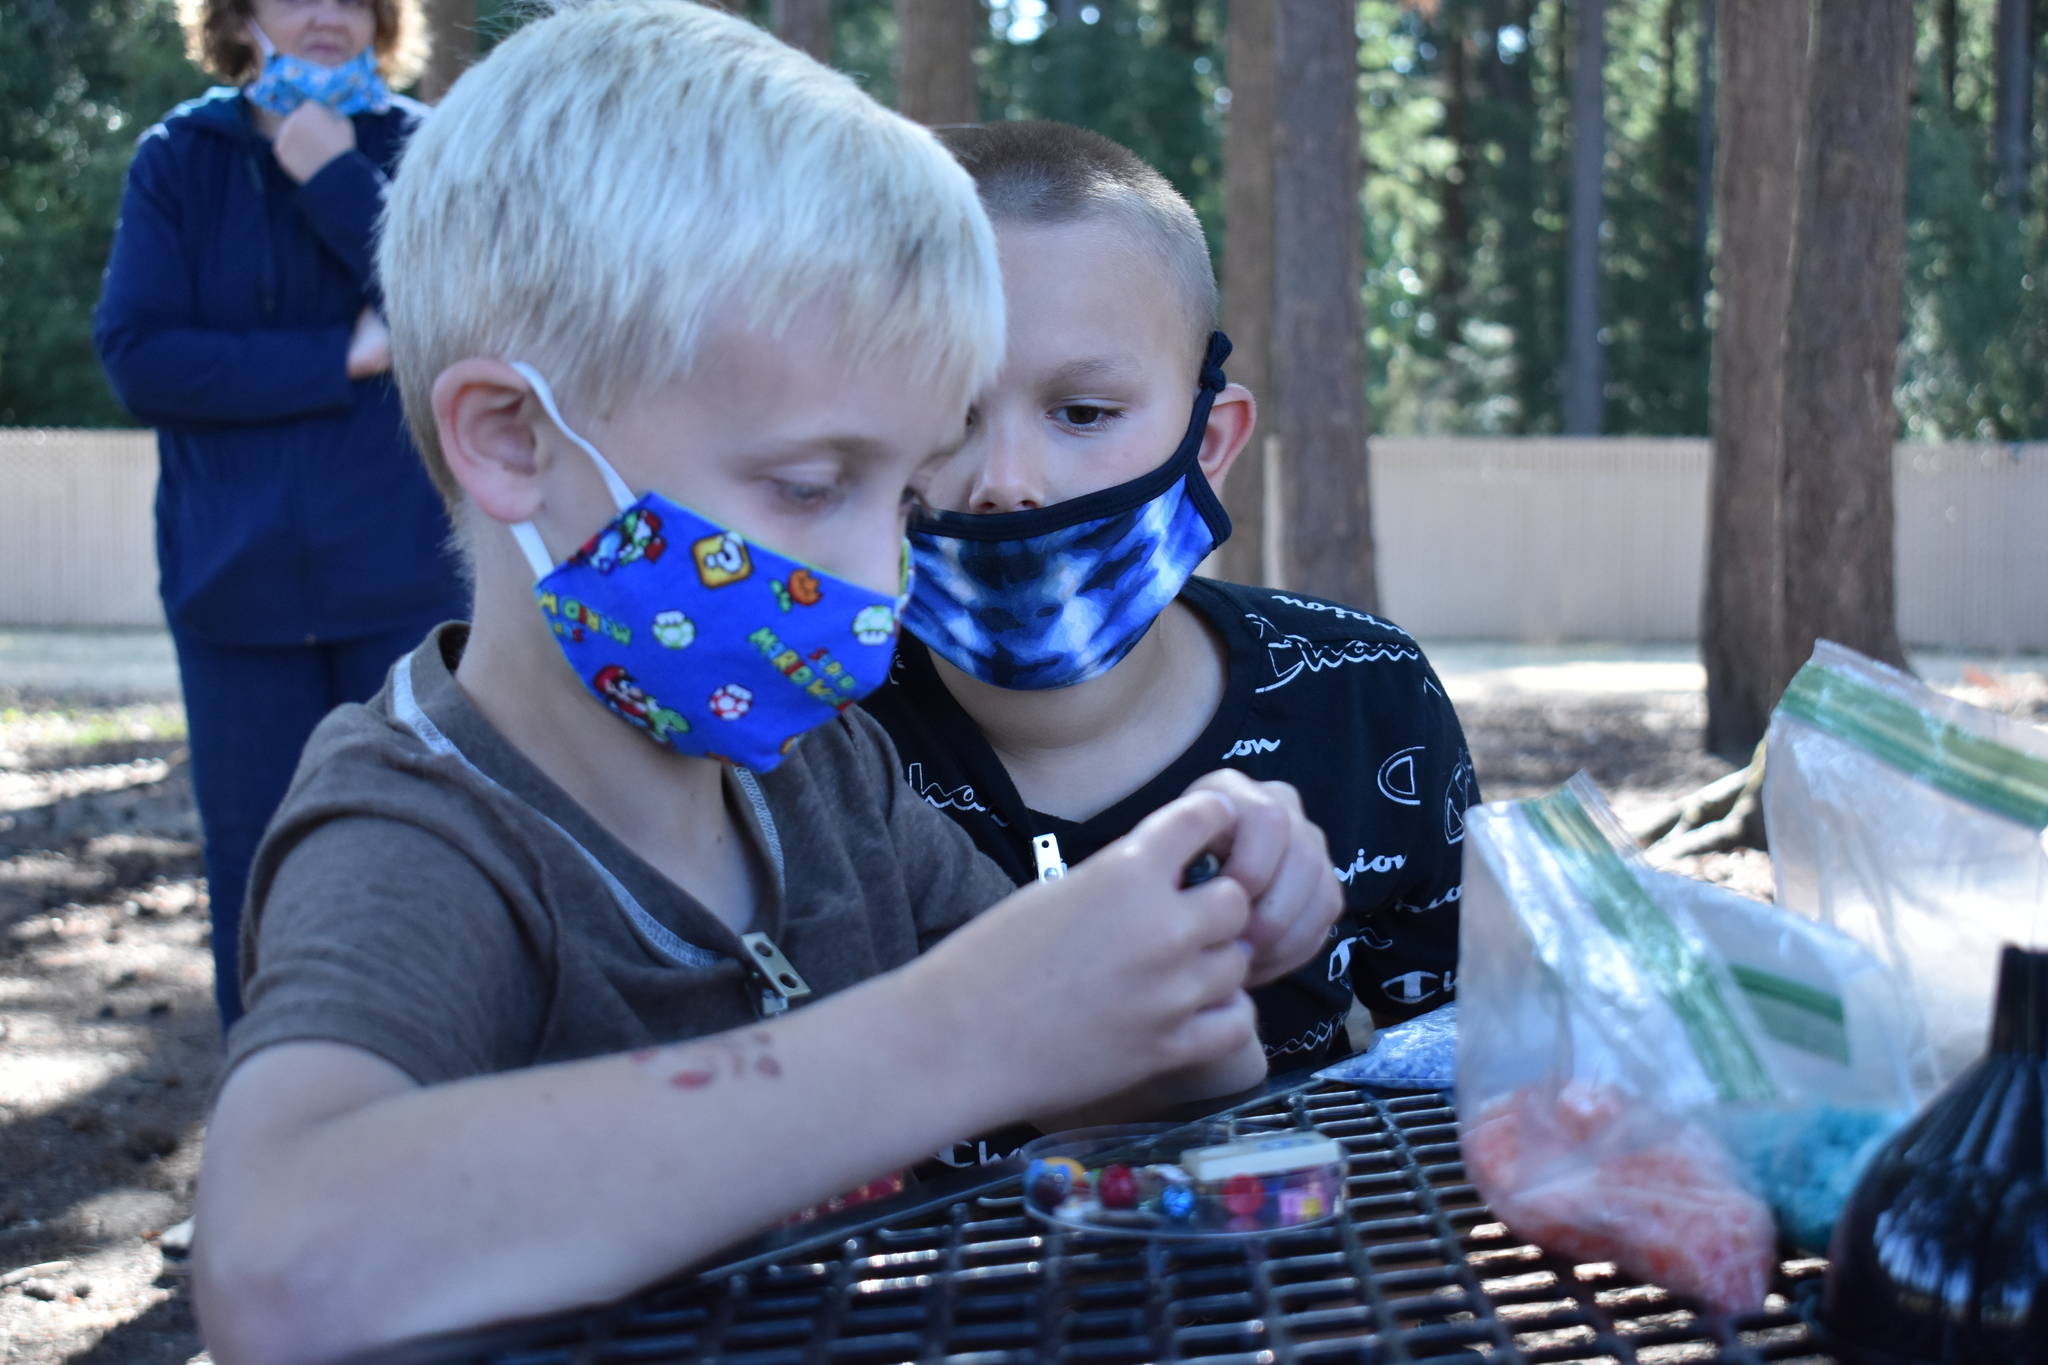 Photo by Emily Gilbert/Whidbey News-Times
Toby Grubbs and Dallas Owen work on “eye spy bottles” during a summer program at Olympic View Elementary in Oak Harbor.